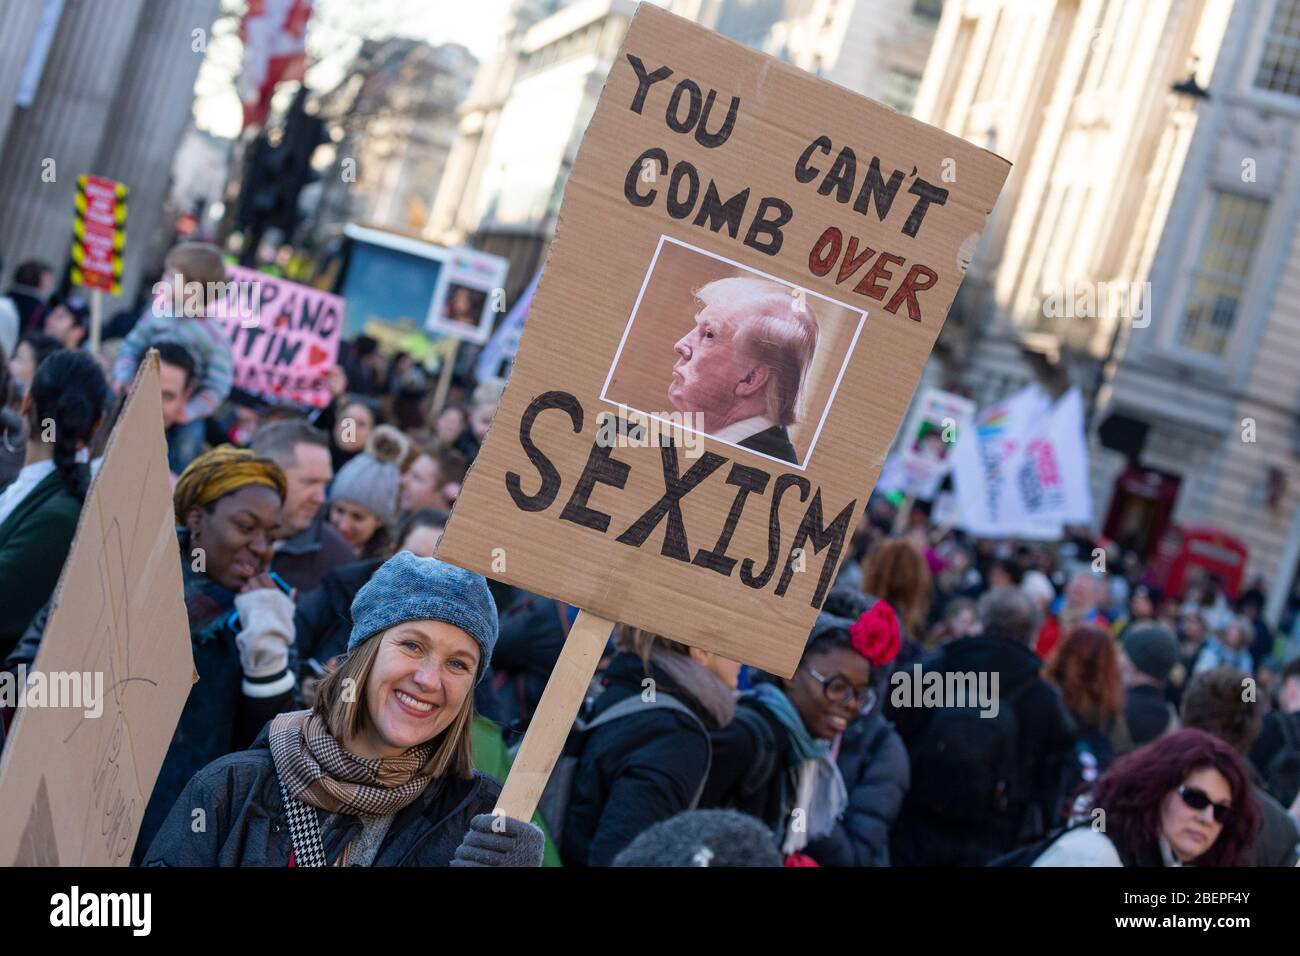 Female protester holding up a sign reading 'You can't comb over sexism', at the 2017 Women's March, London Stock Photo